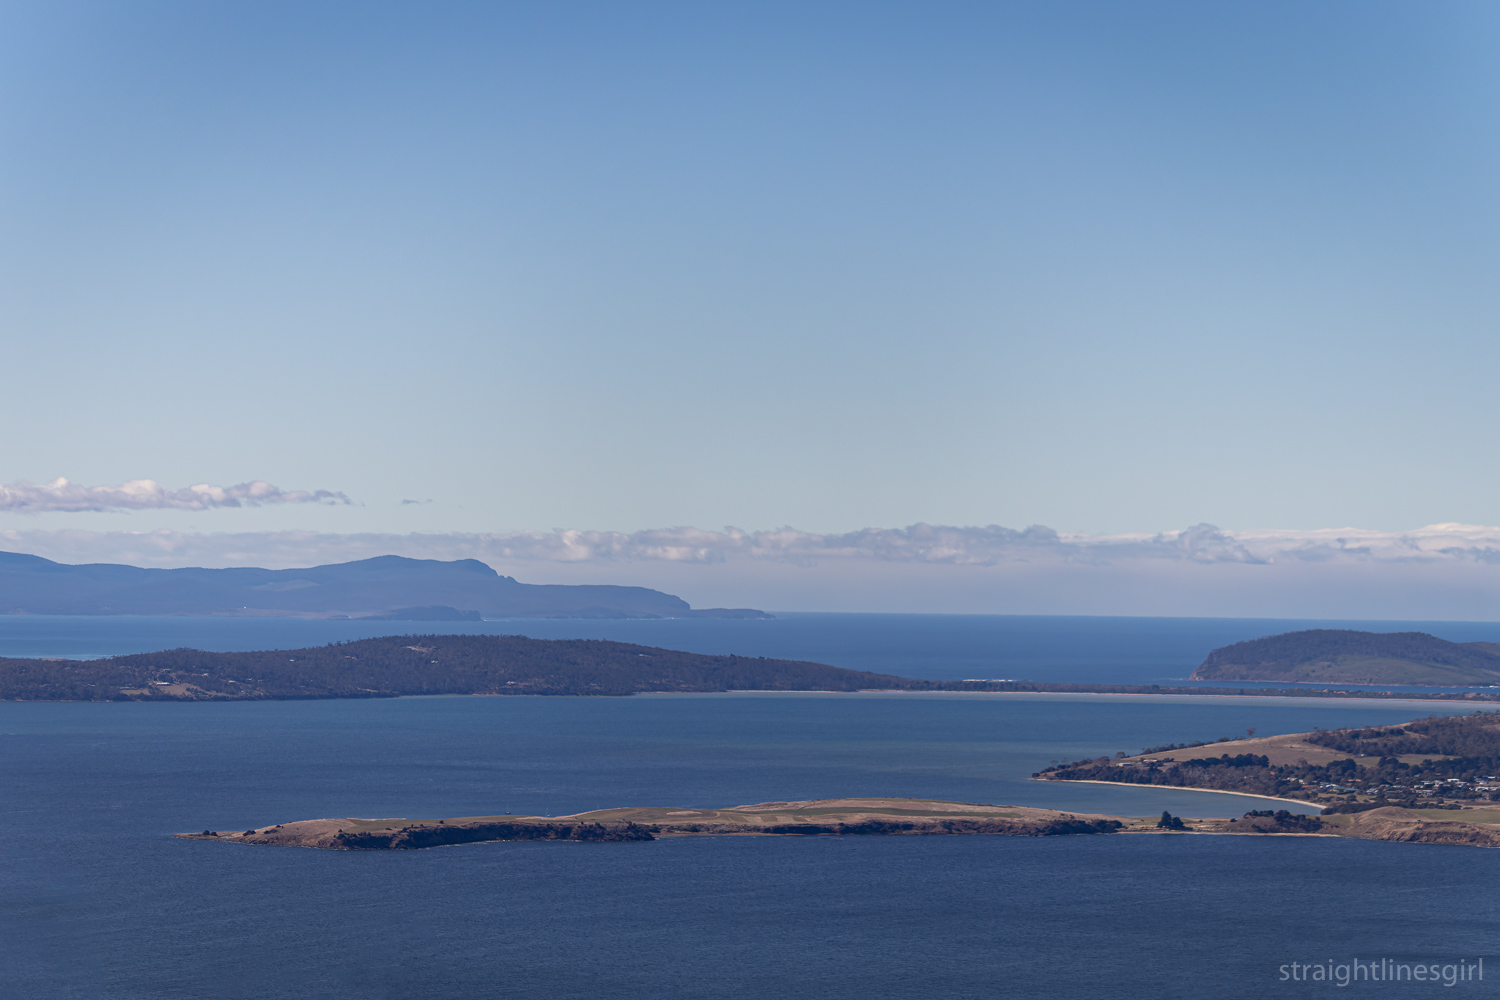 A view of water, land masses and blue sky